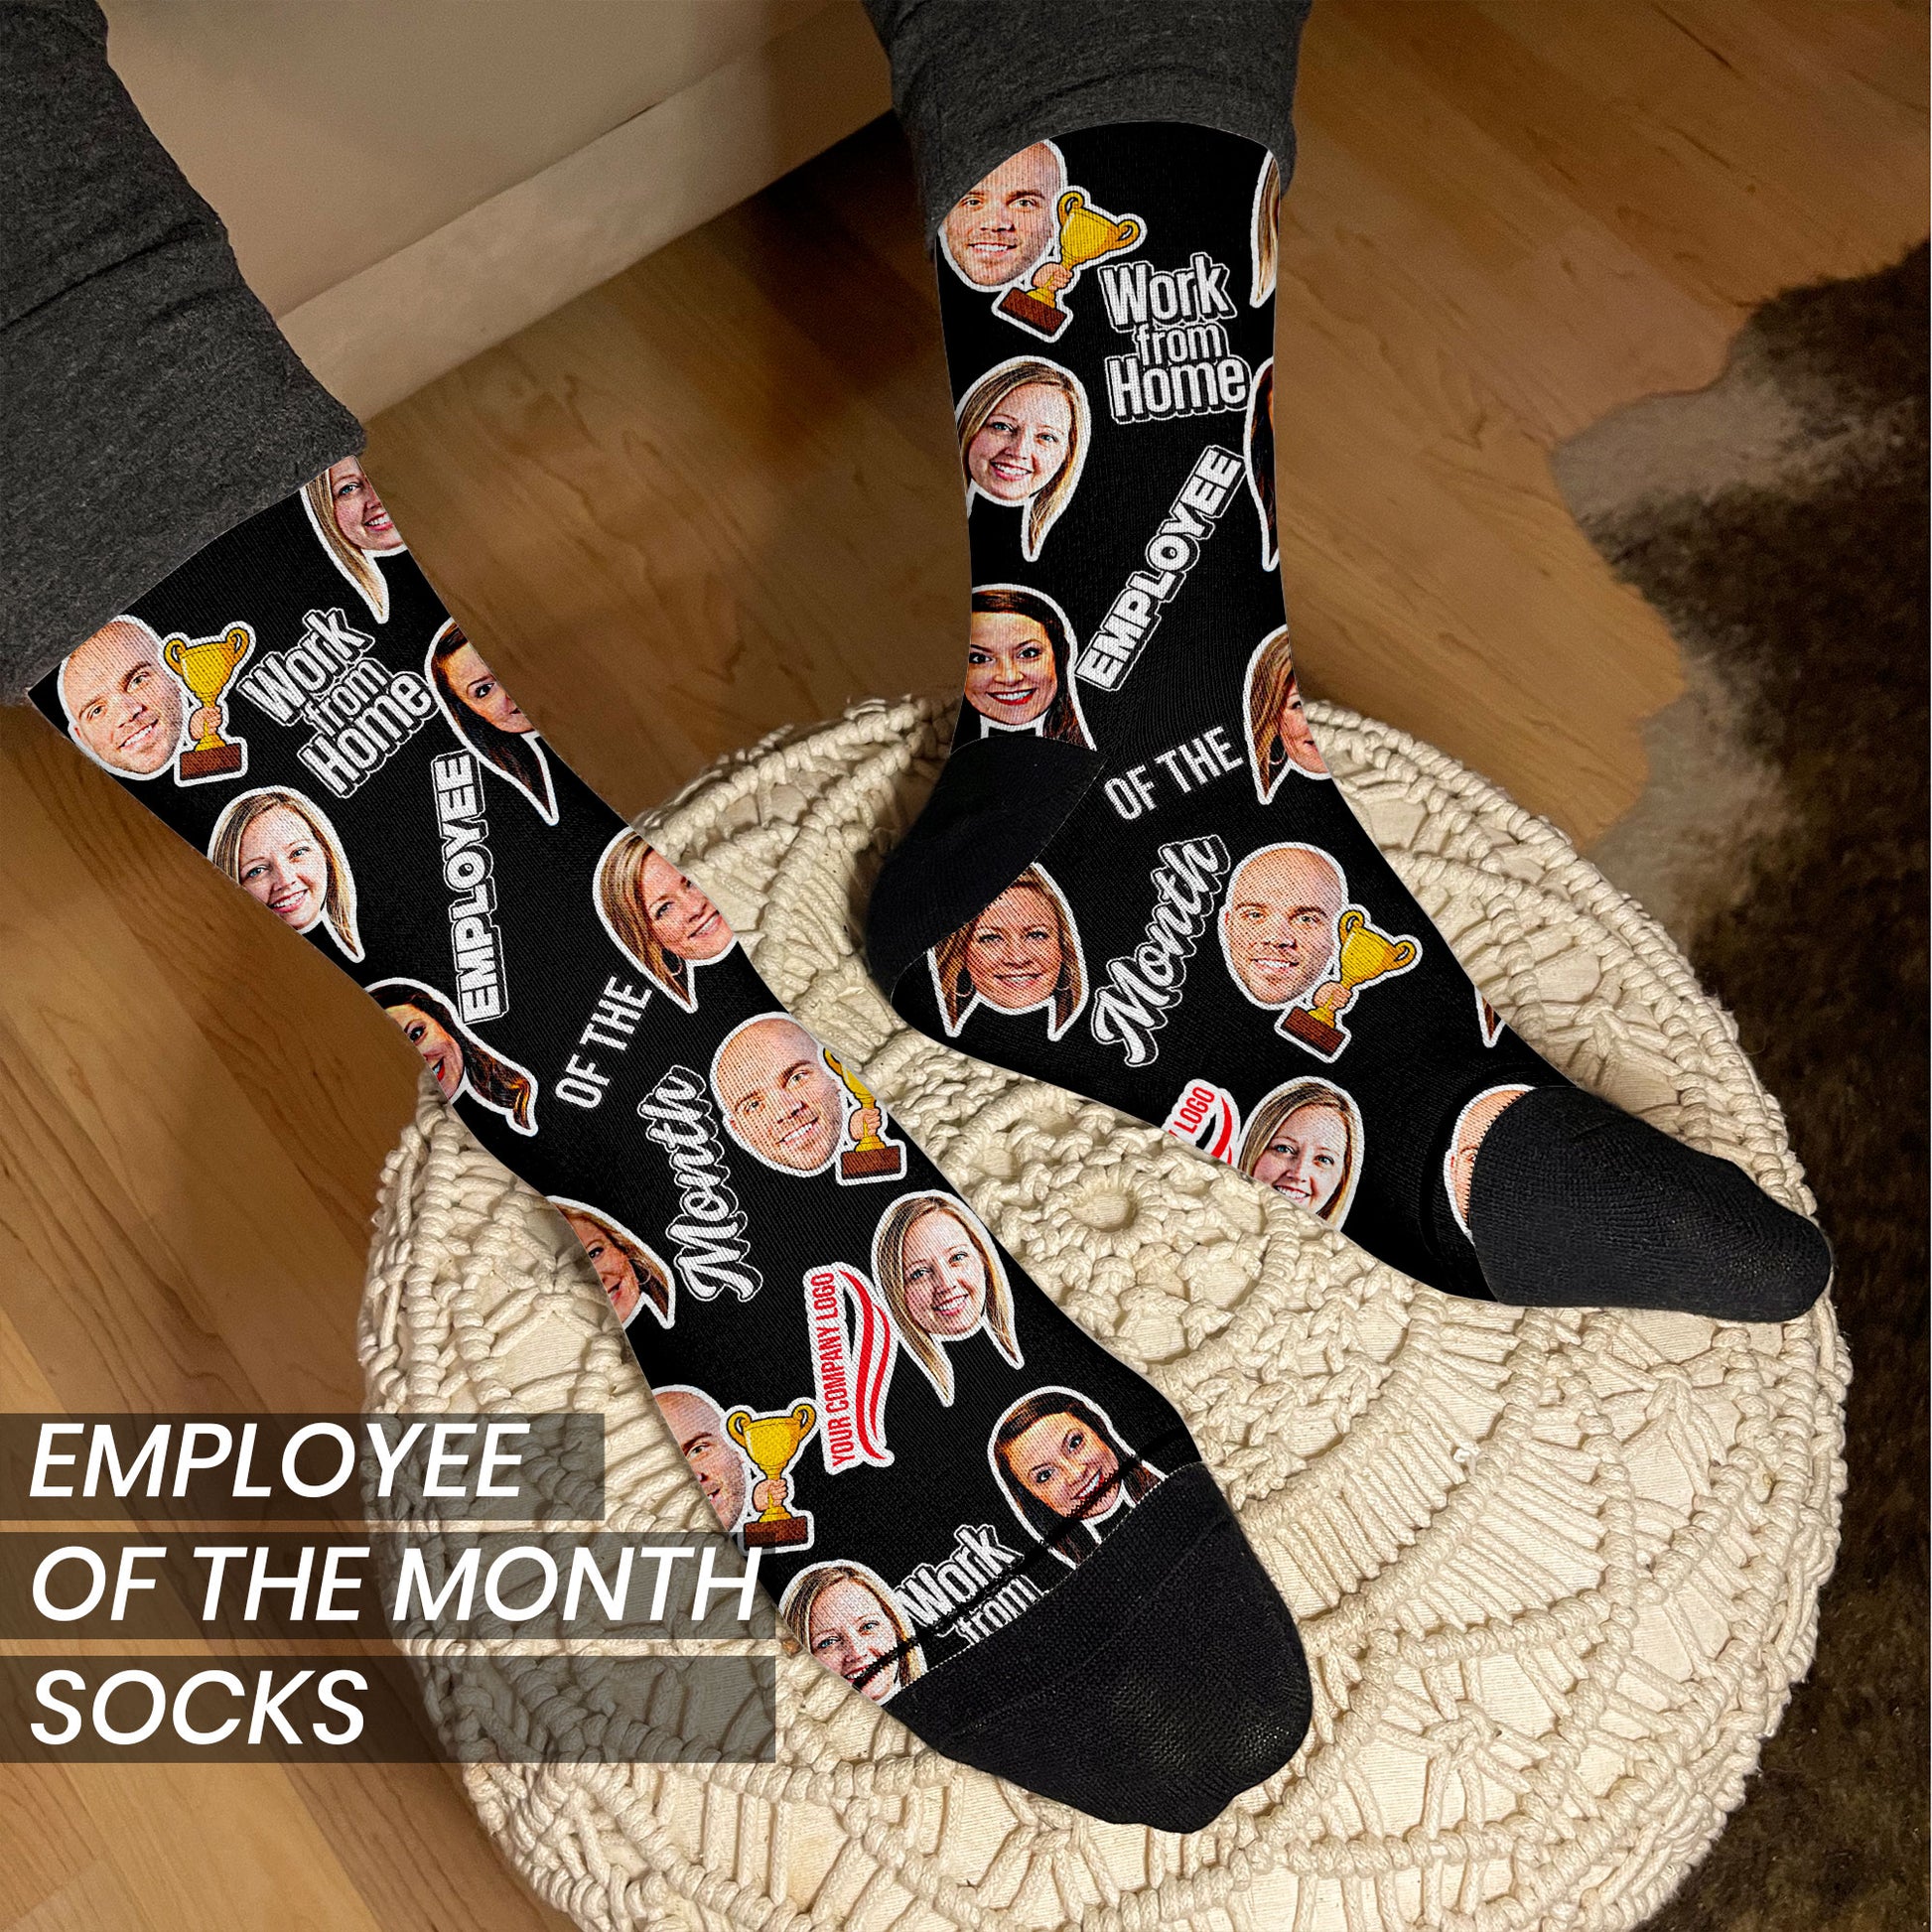 work from home employee of the month coworker gift socks with faces